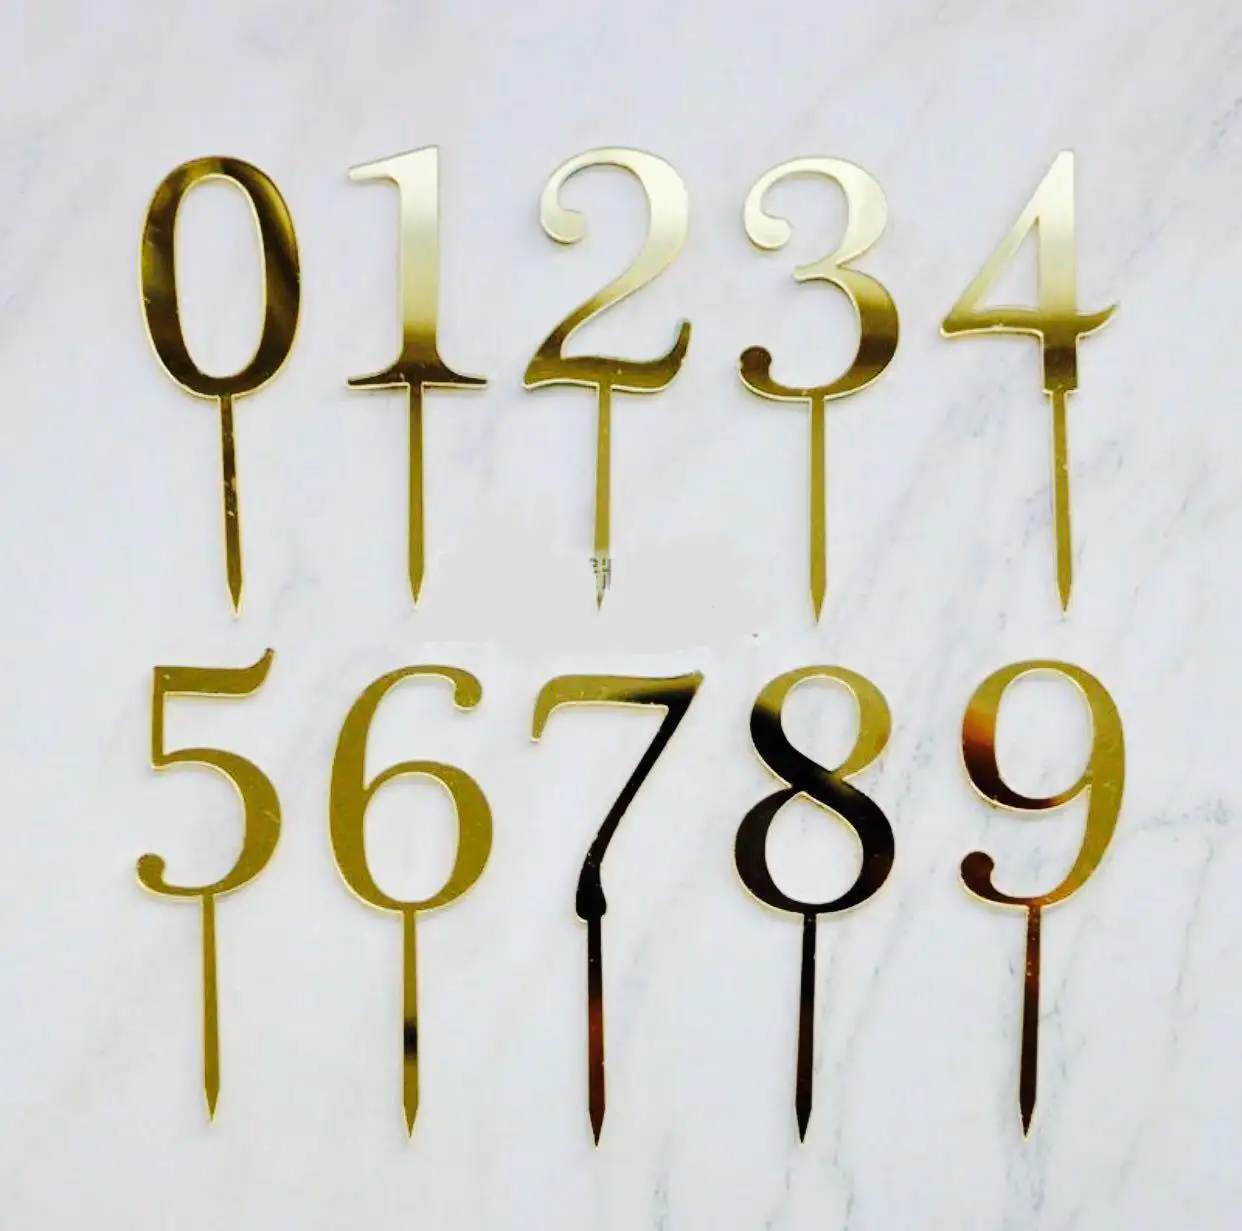 Rose Gold Acrylic Numbers 0-9 Cake Toppers Table Numbers For Wedding Anniversary Birthday Party